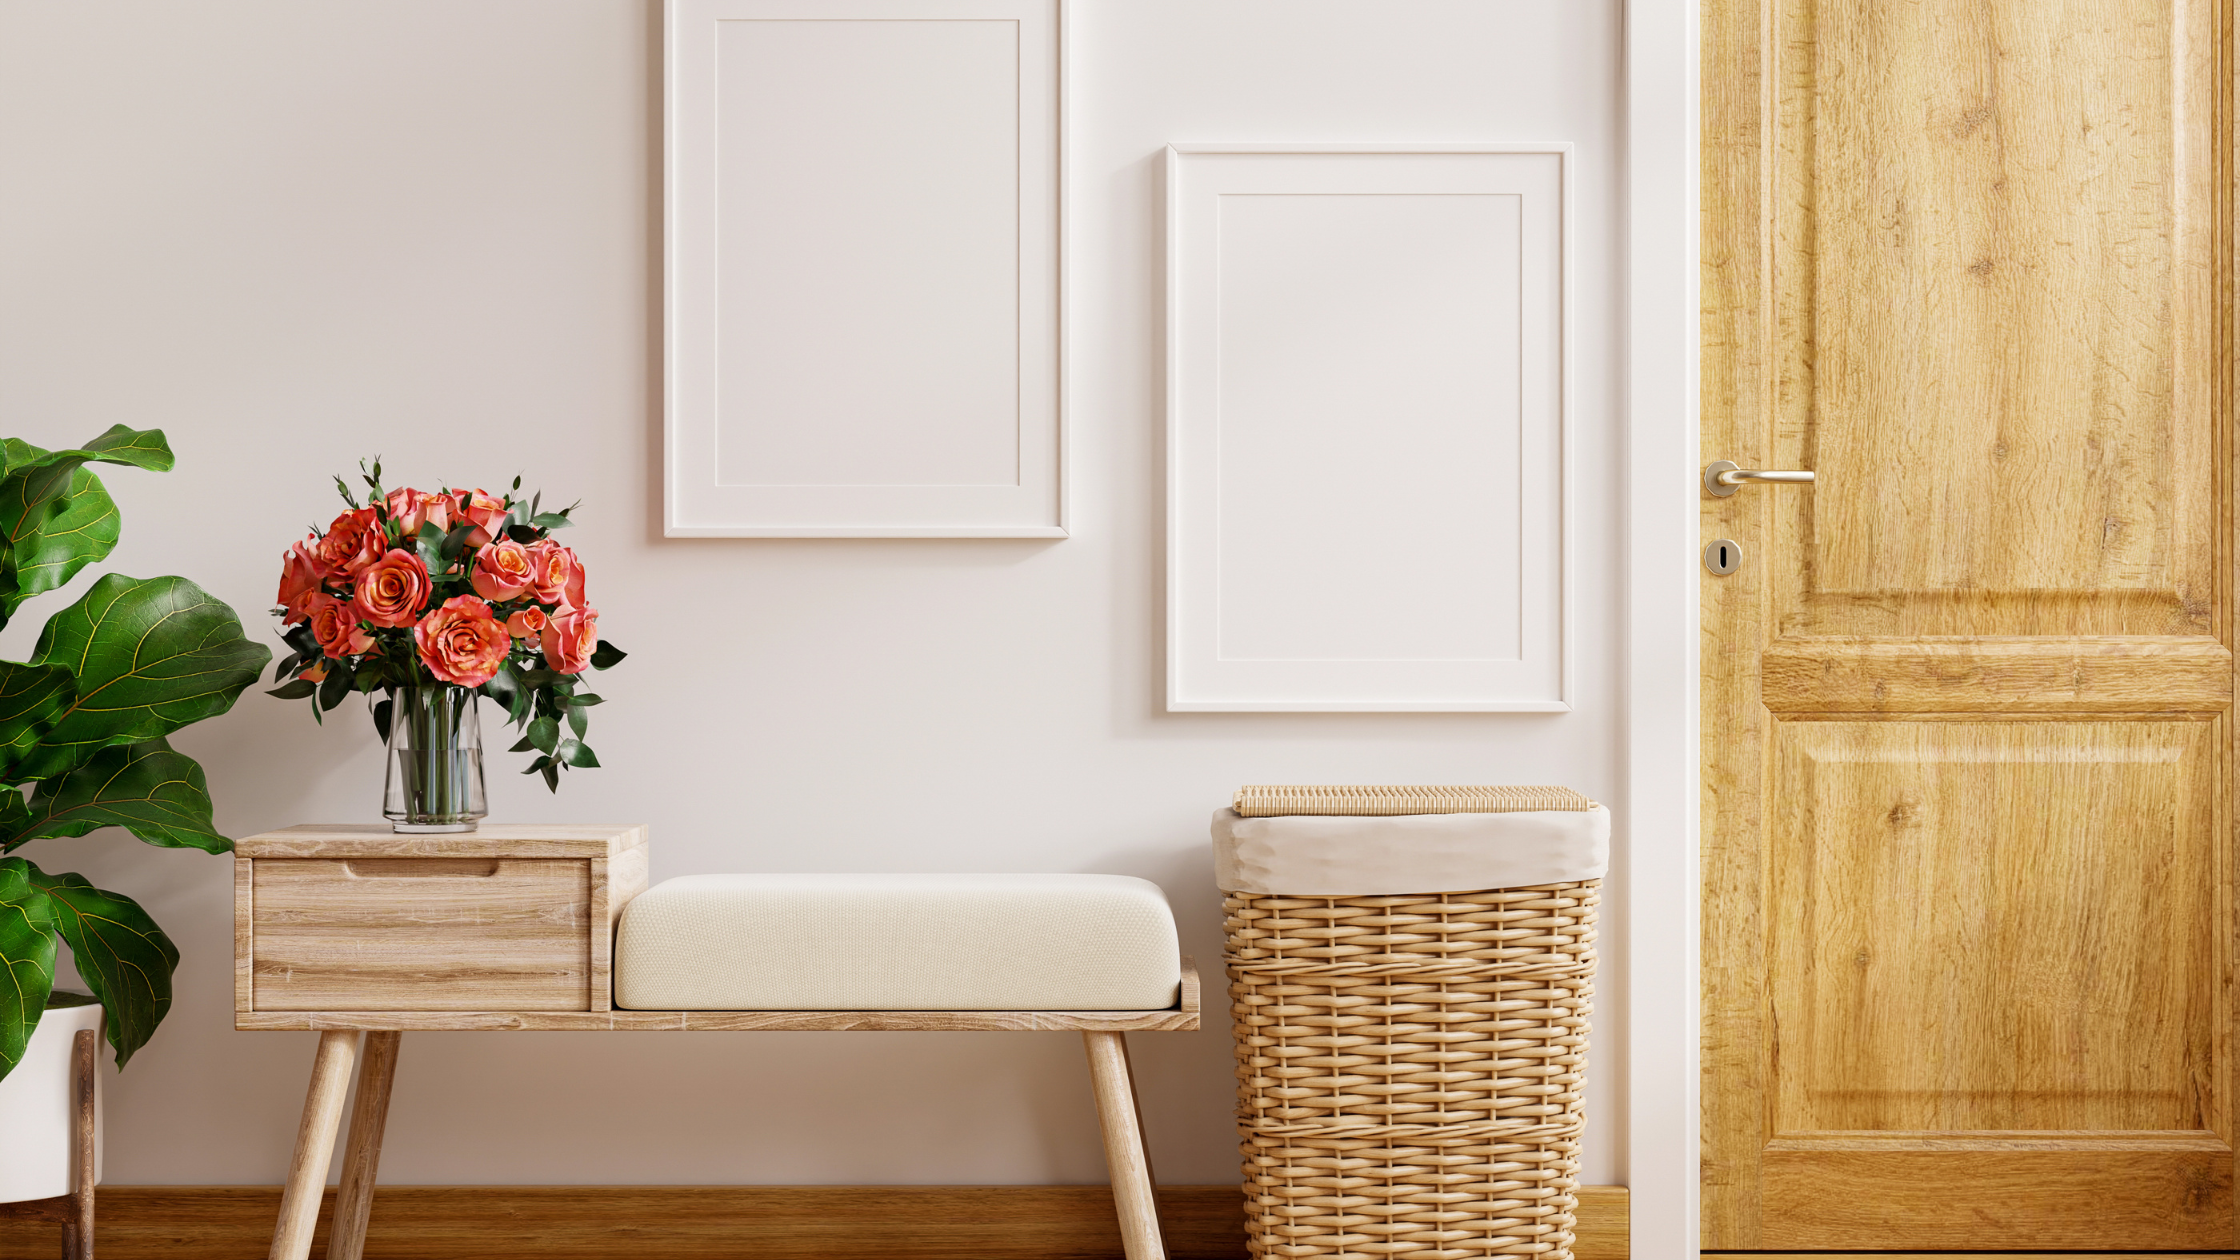 Should You Paint Door Frames? And How to Do It Right